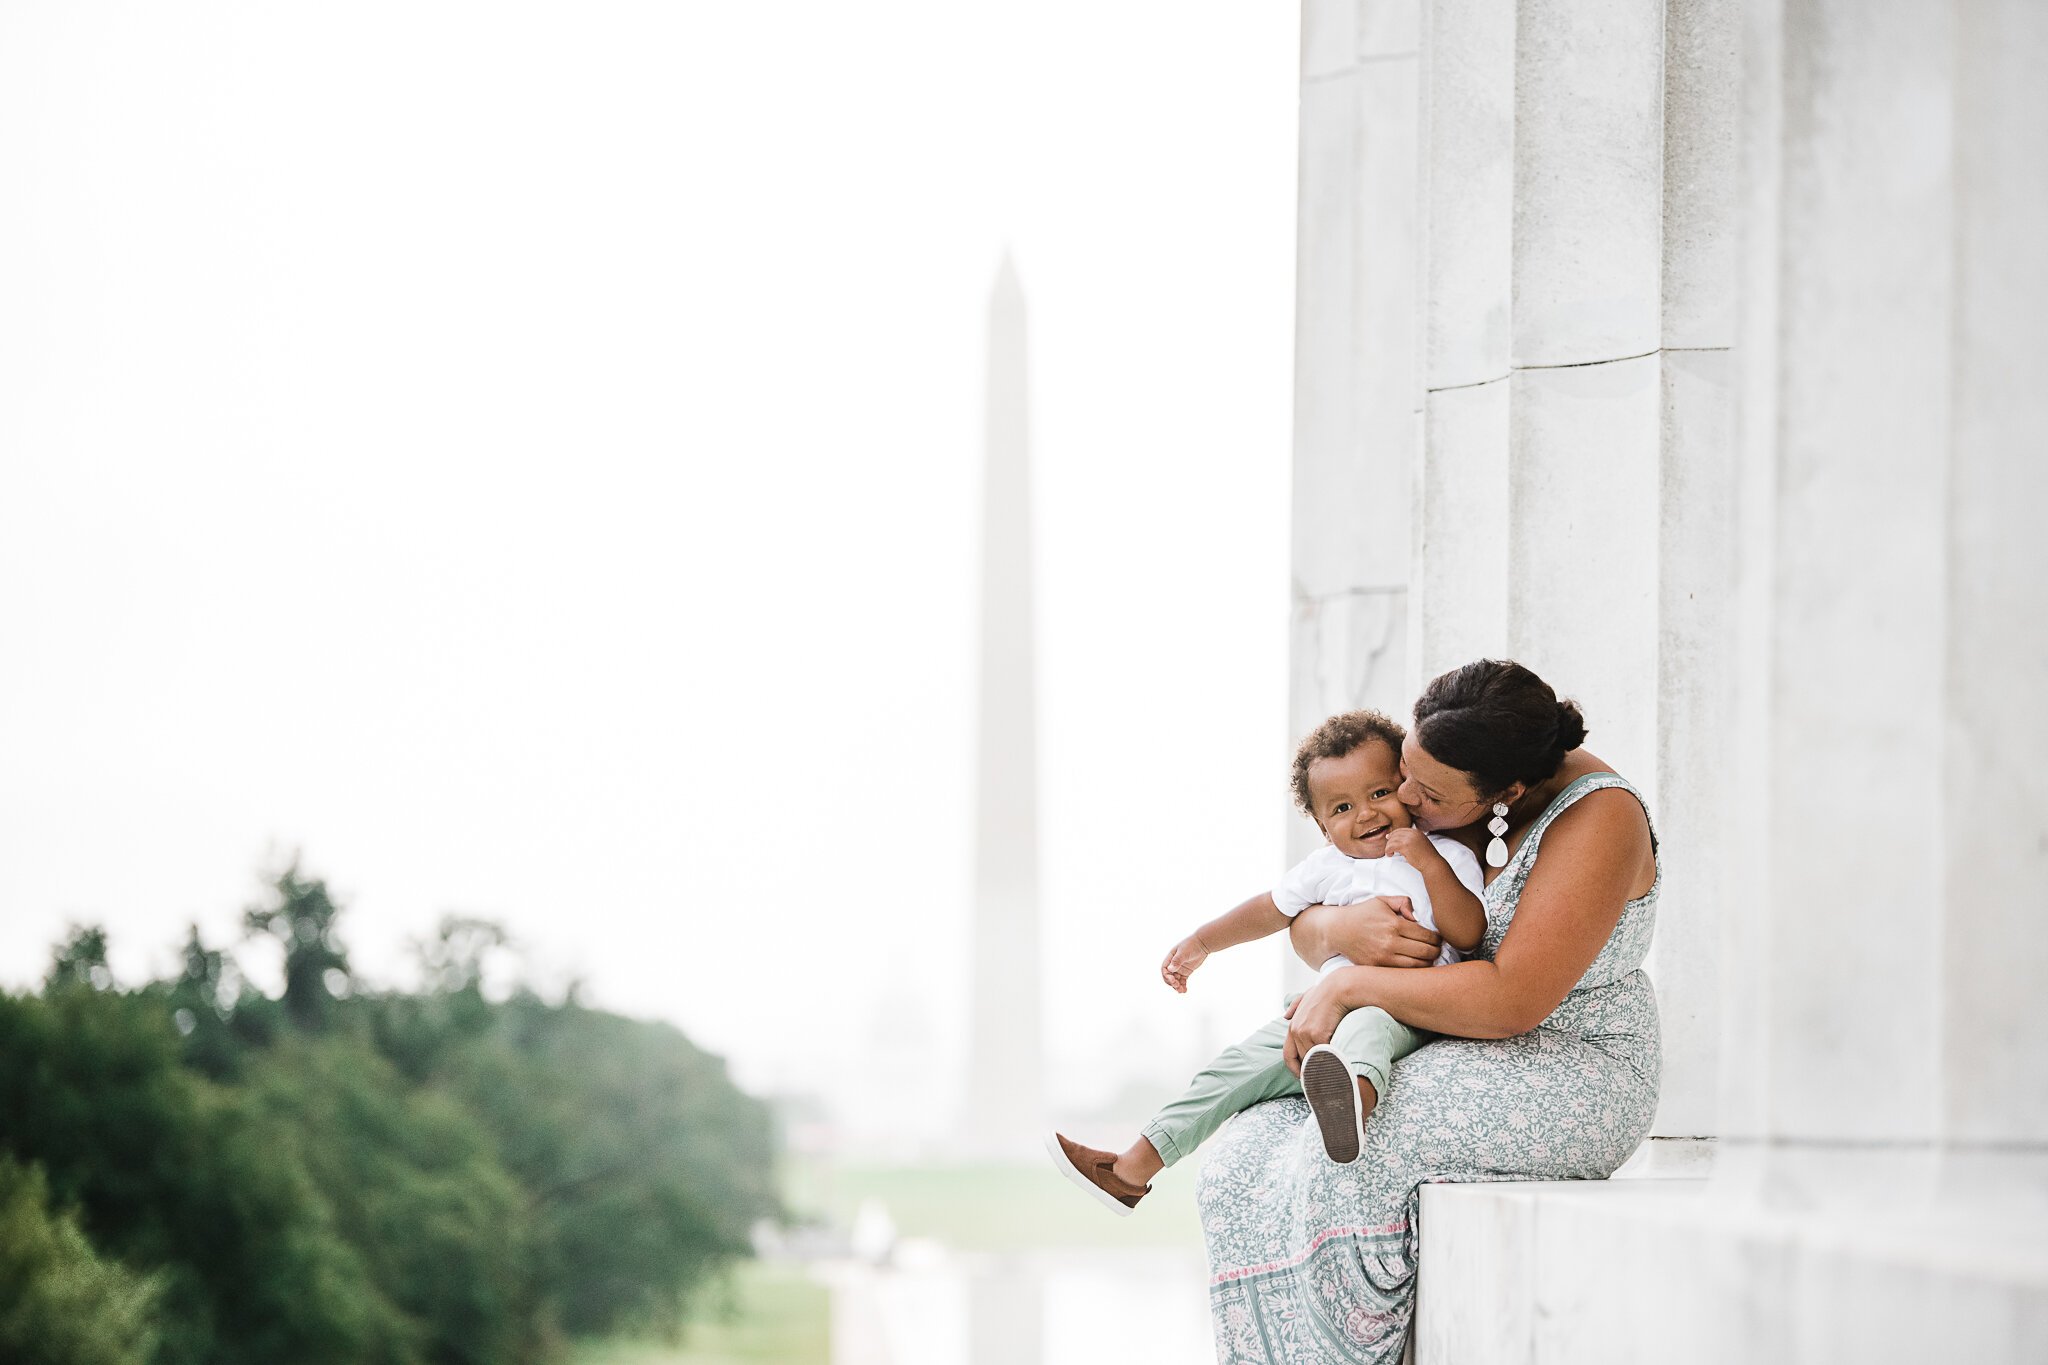 Mommy & me session at the National Mall